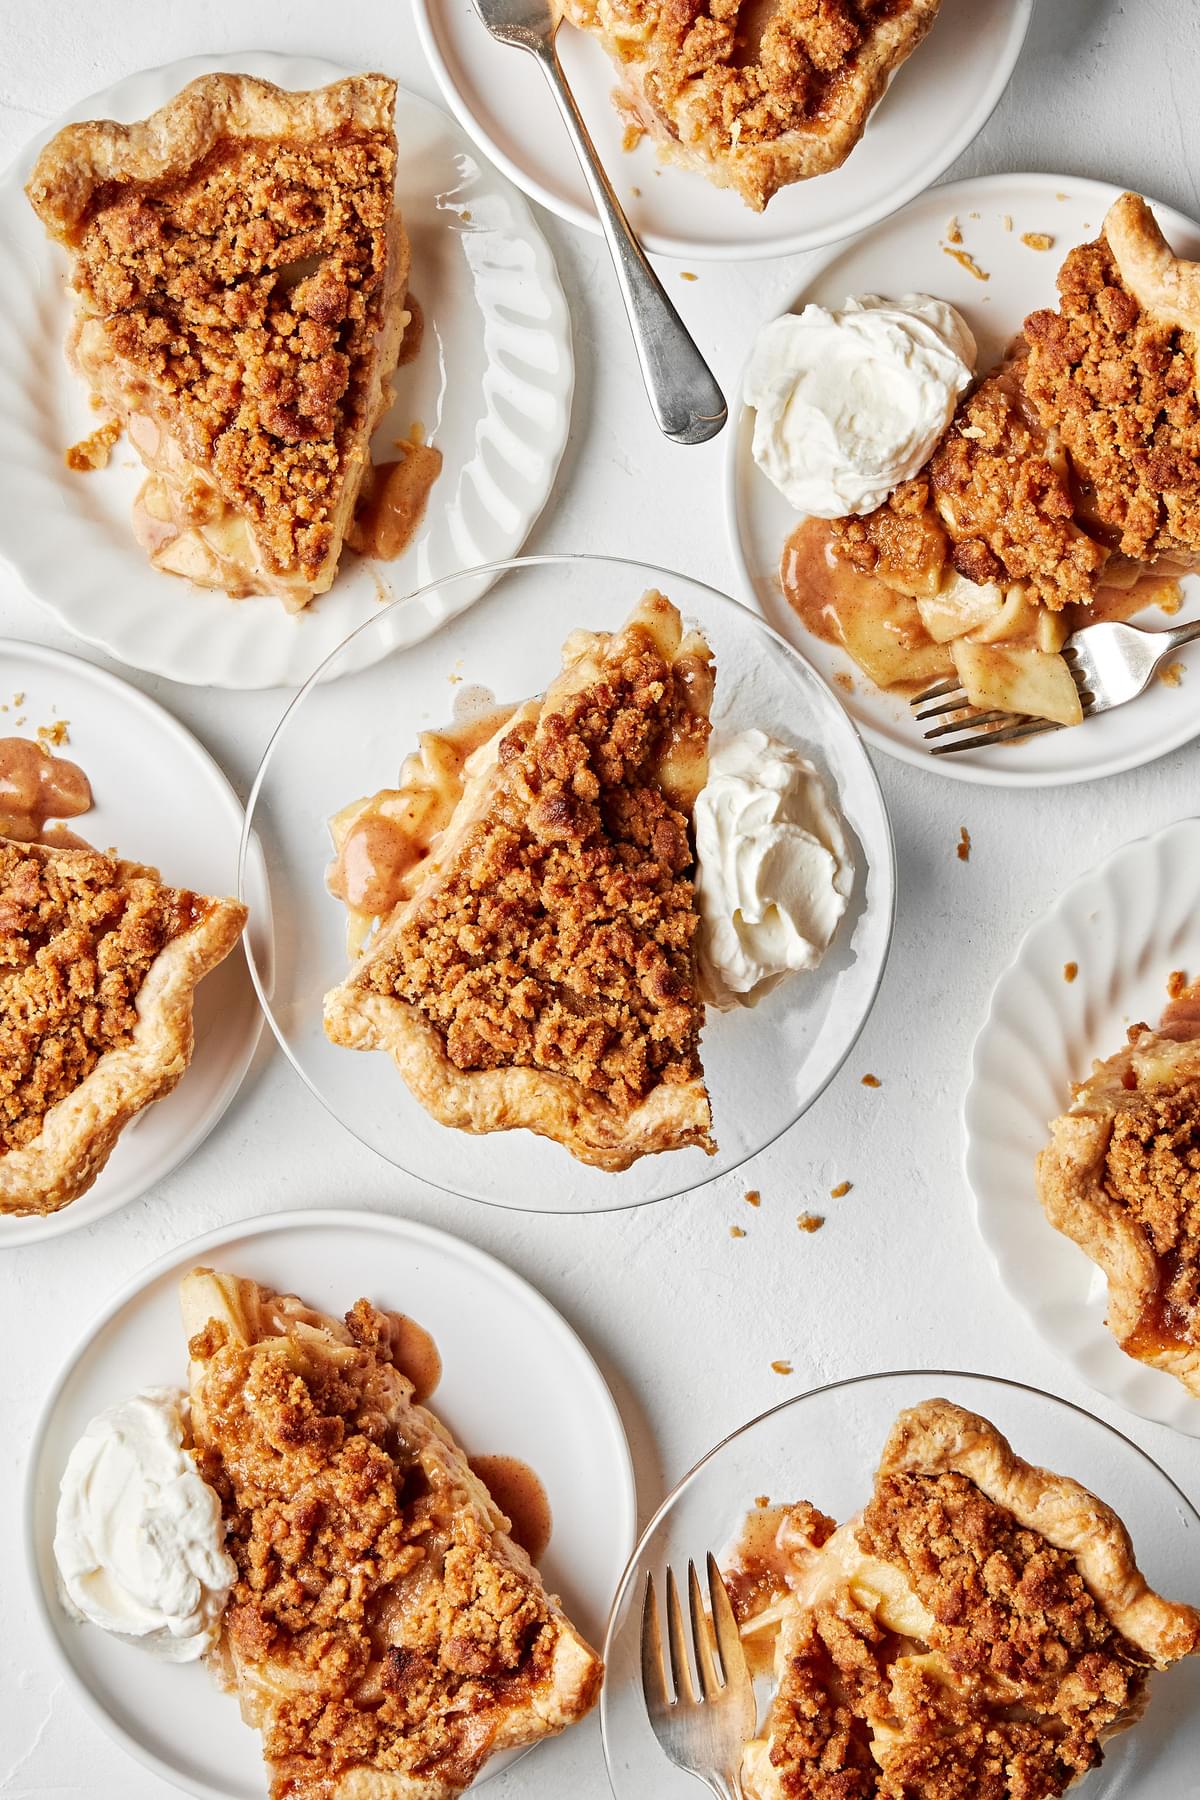 slices of homemade Dutch apple pie toped with dollops of whipped cream on plates